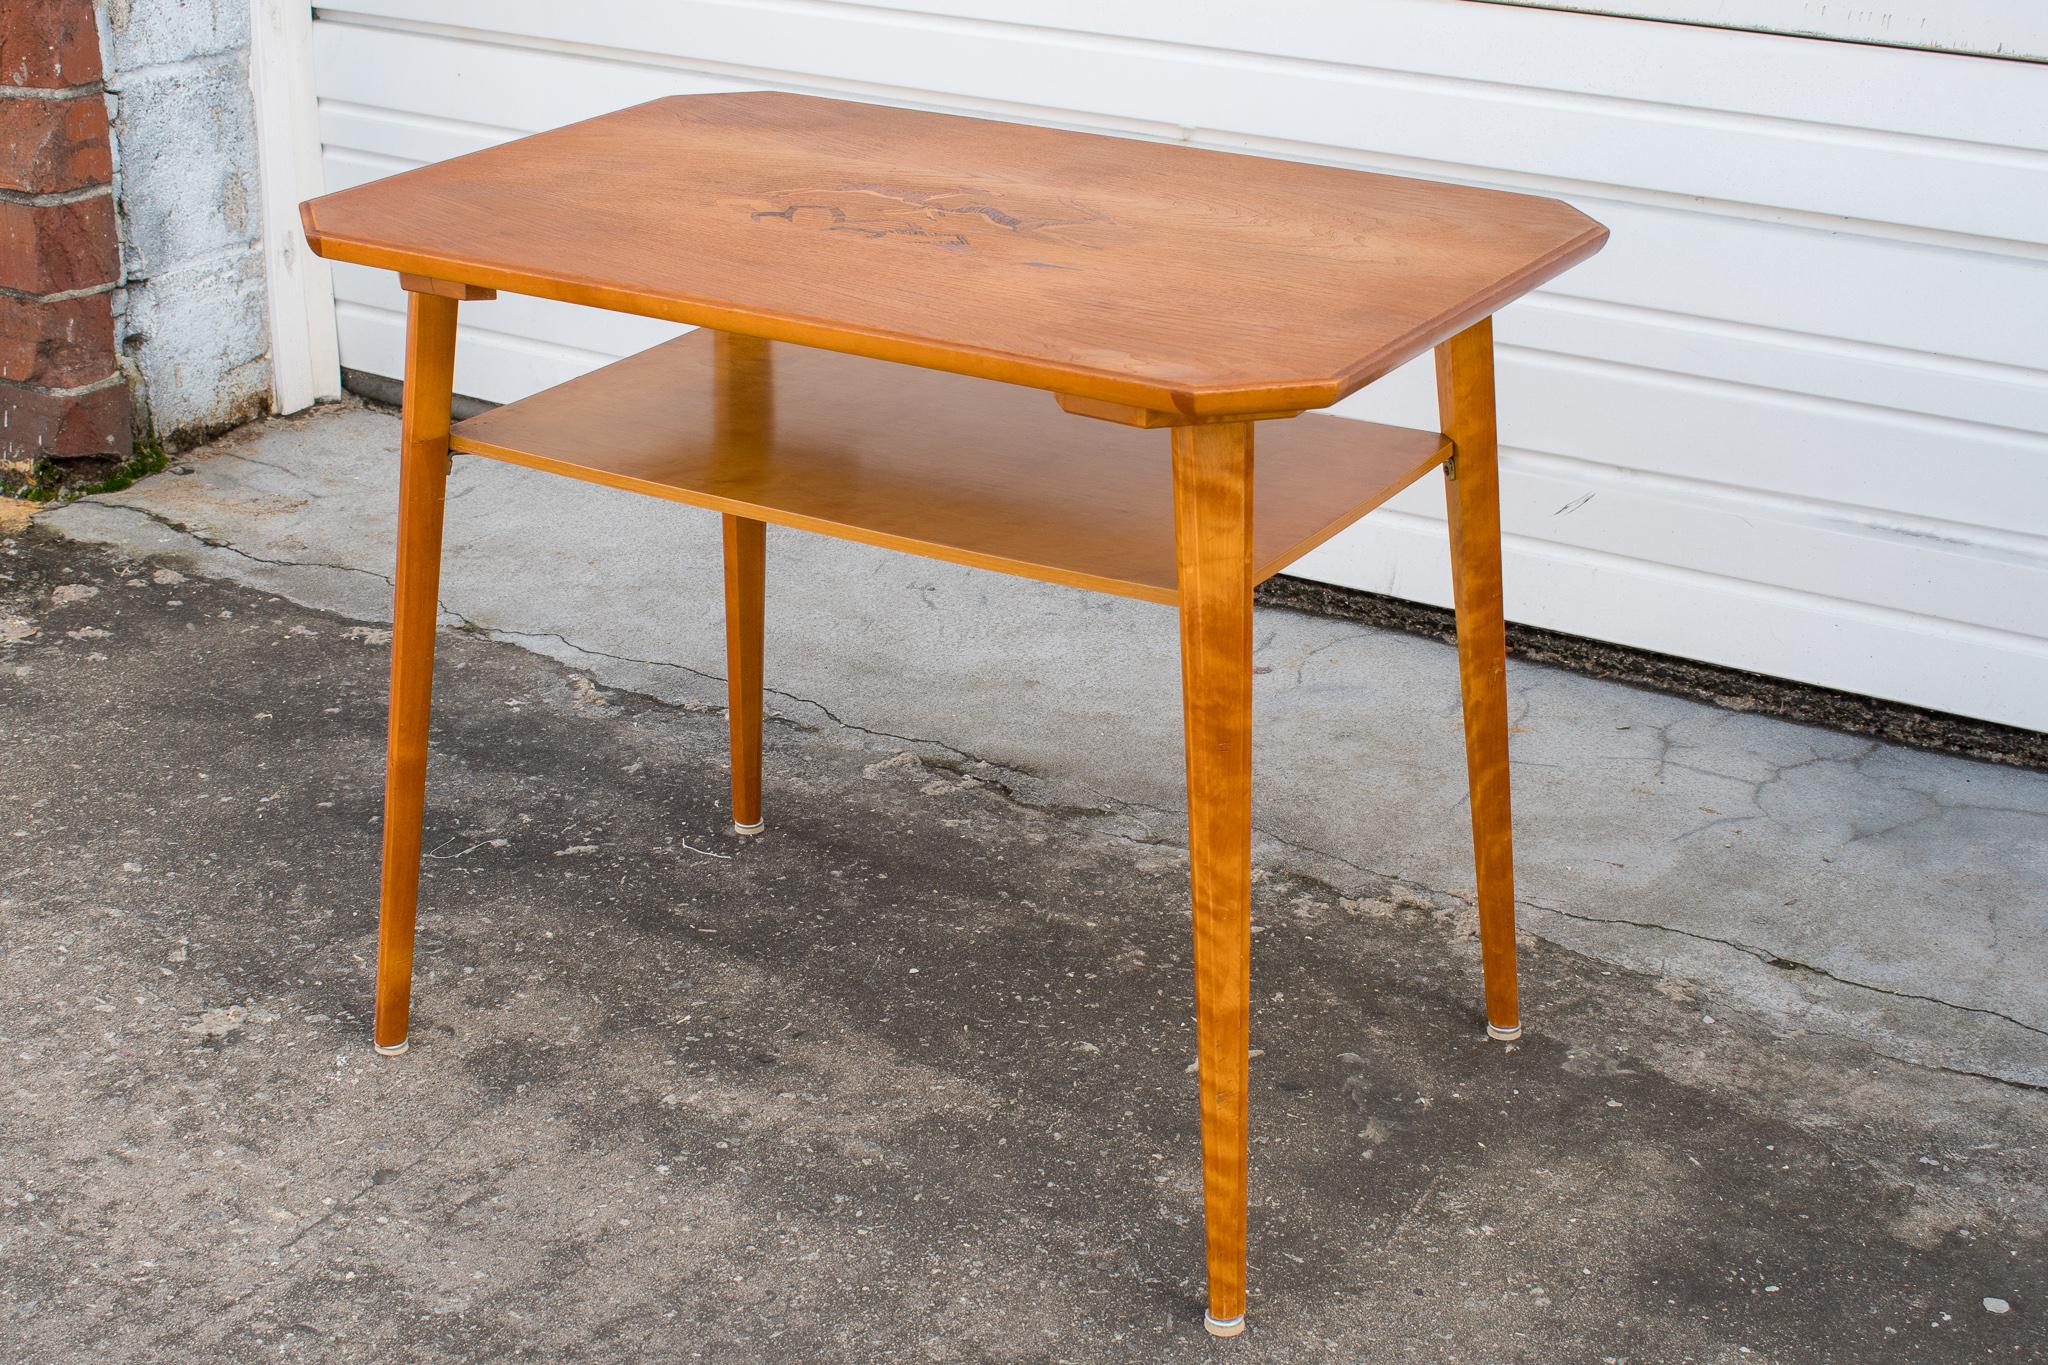 Swedish Modern side, end, or coffee table with shelf. Details include clipped corners, tapered legs, and inlay of rosewood, jacaranda, and mahogany depicting two deer.